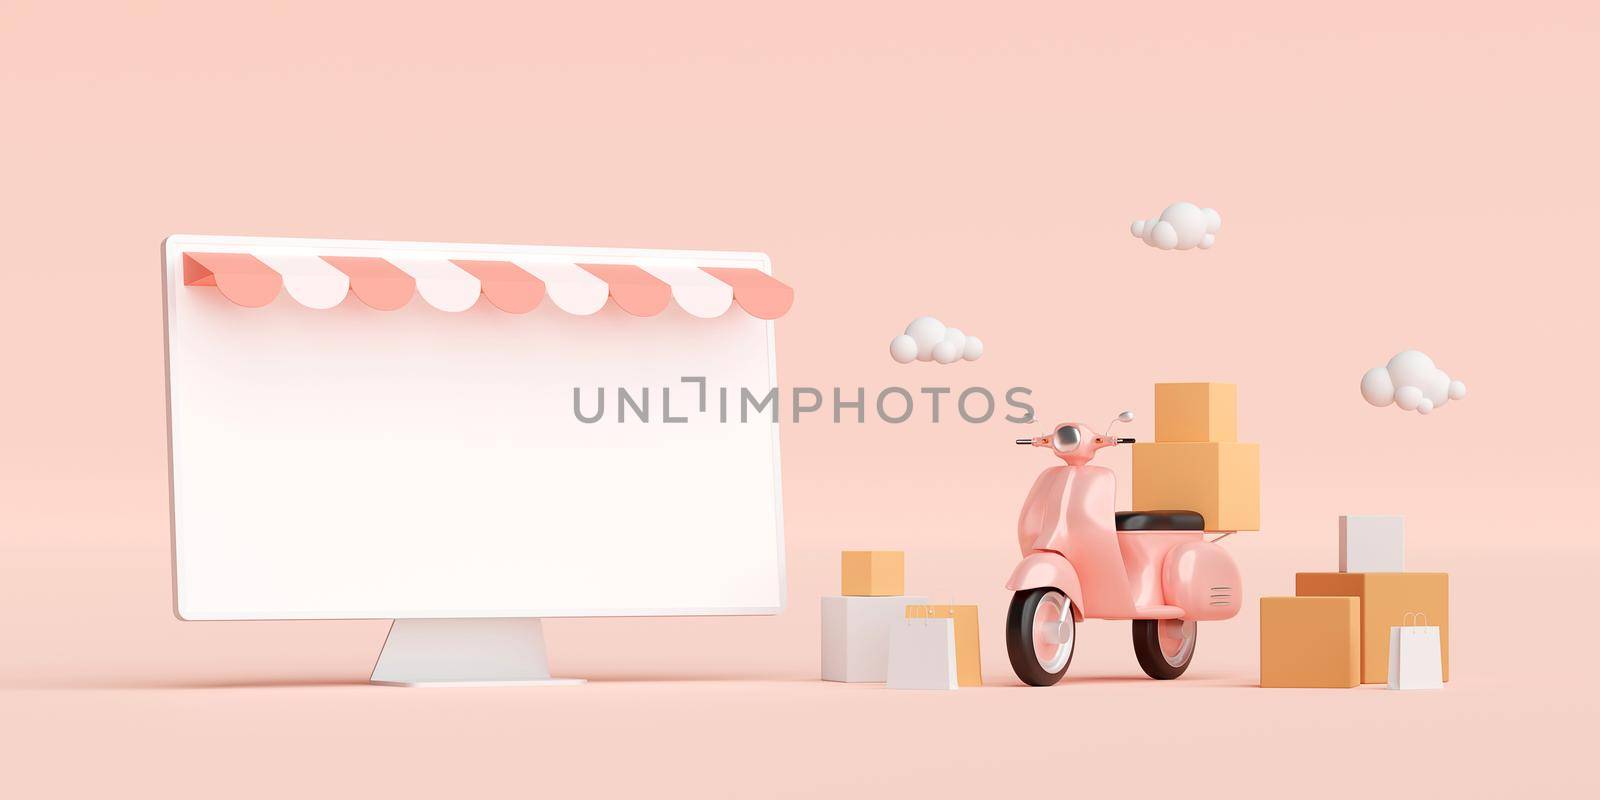 E-commerce concept, Shopping and delivery service online, Transportation or food delivery by scooter, 3d illustration